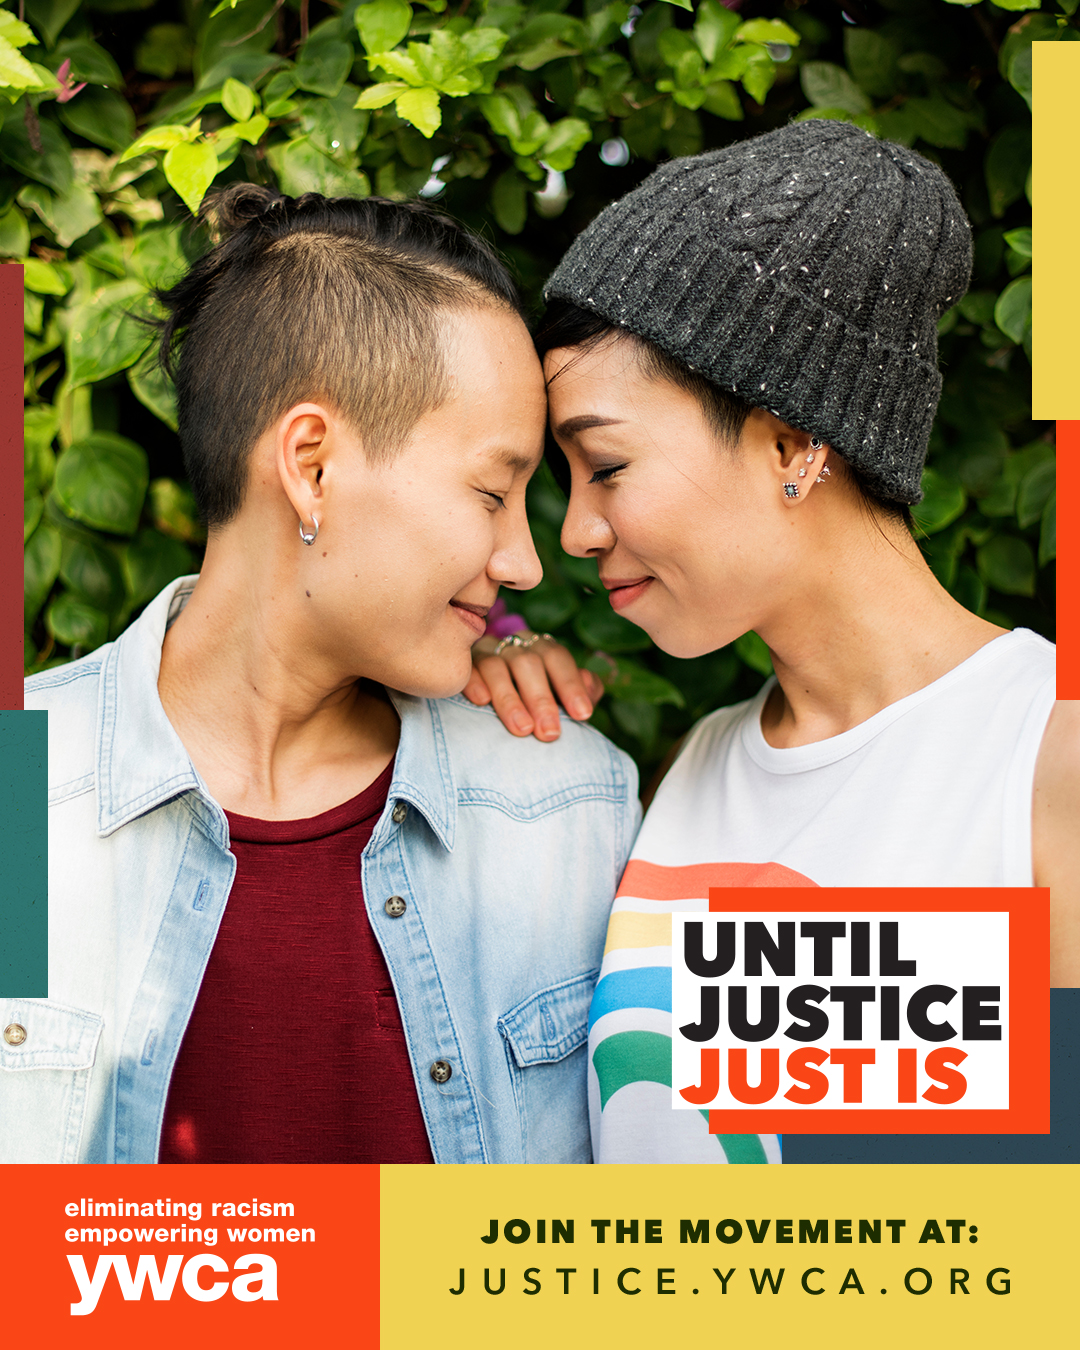 Image of two east Asians in a caring embrace with text that reads, "Until Justice Just Is."